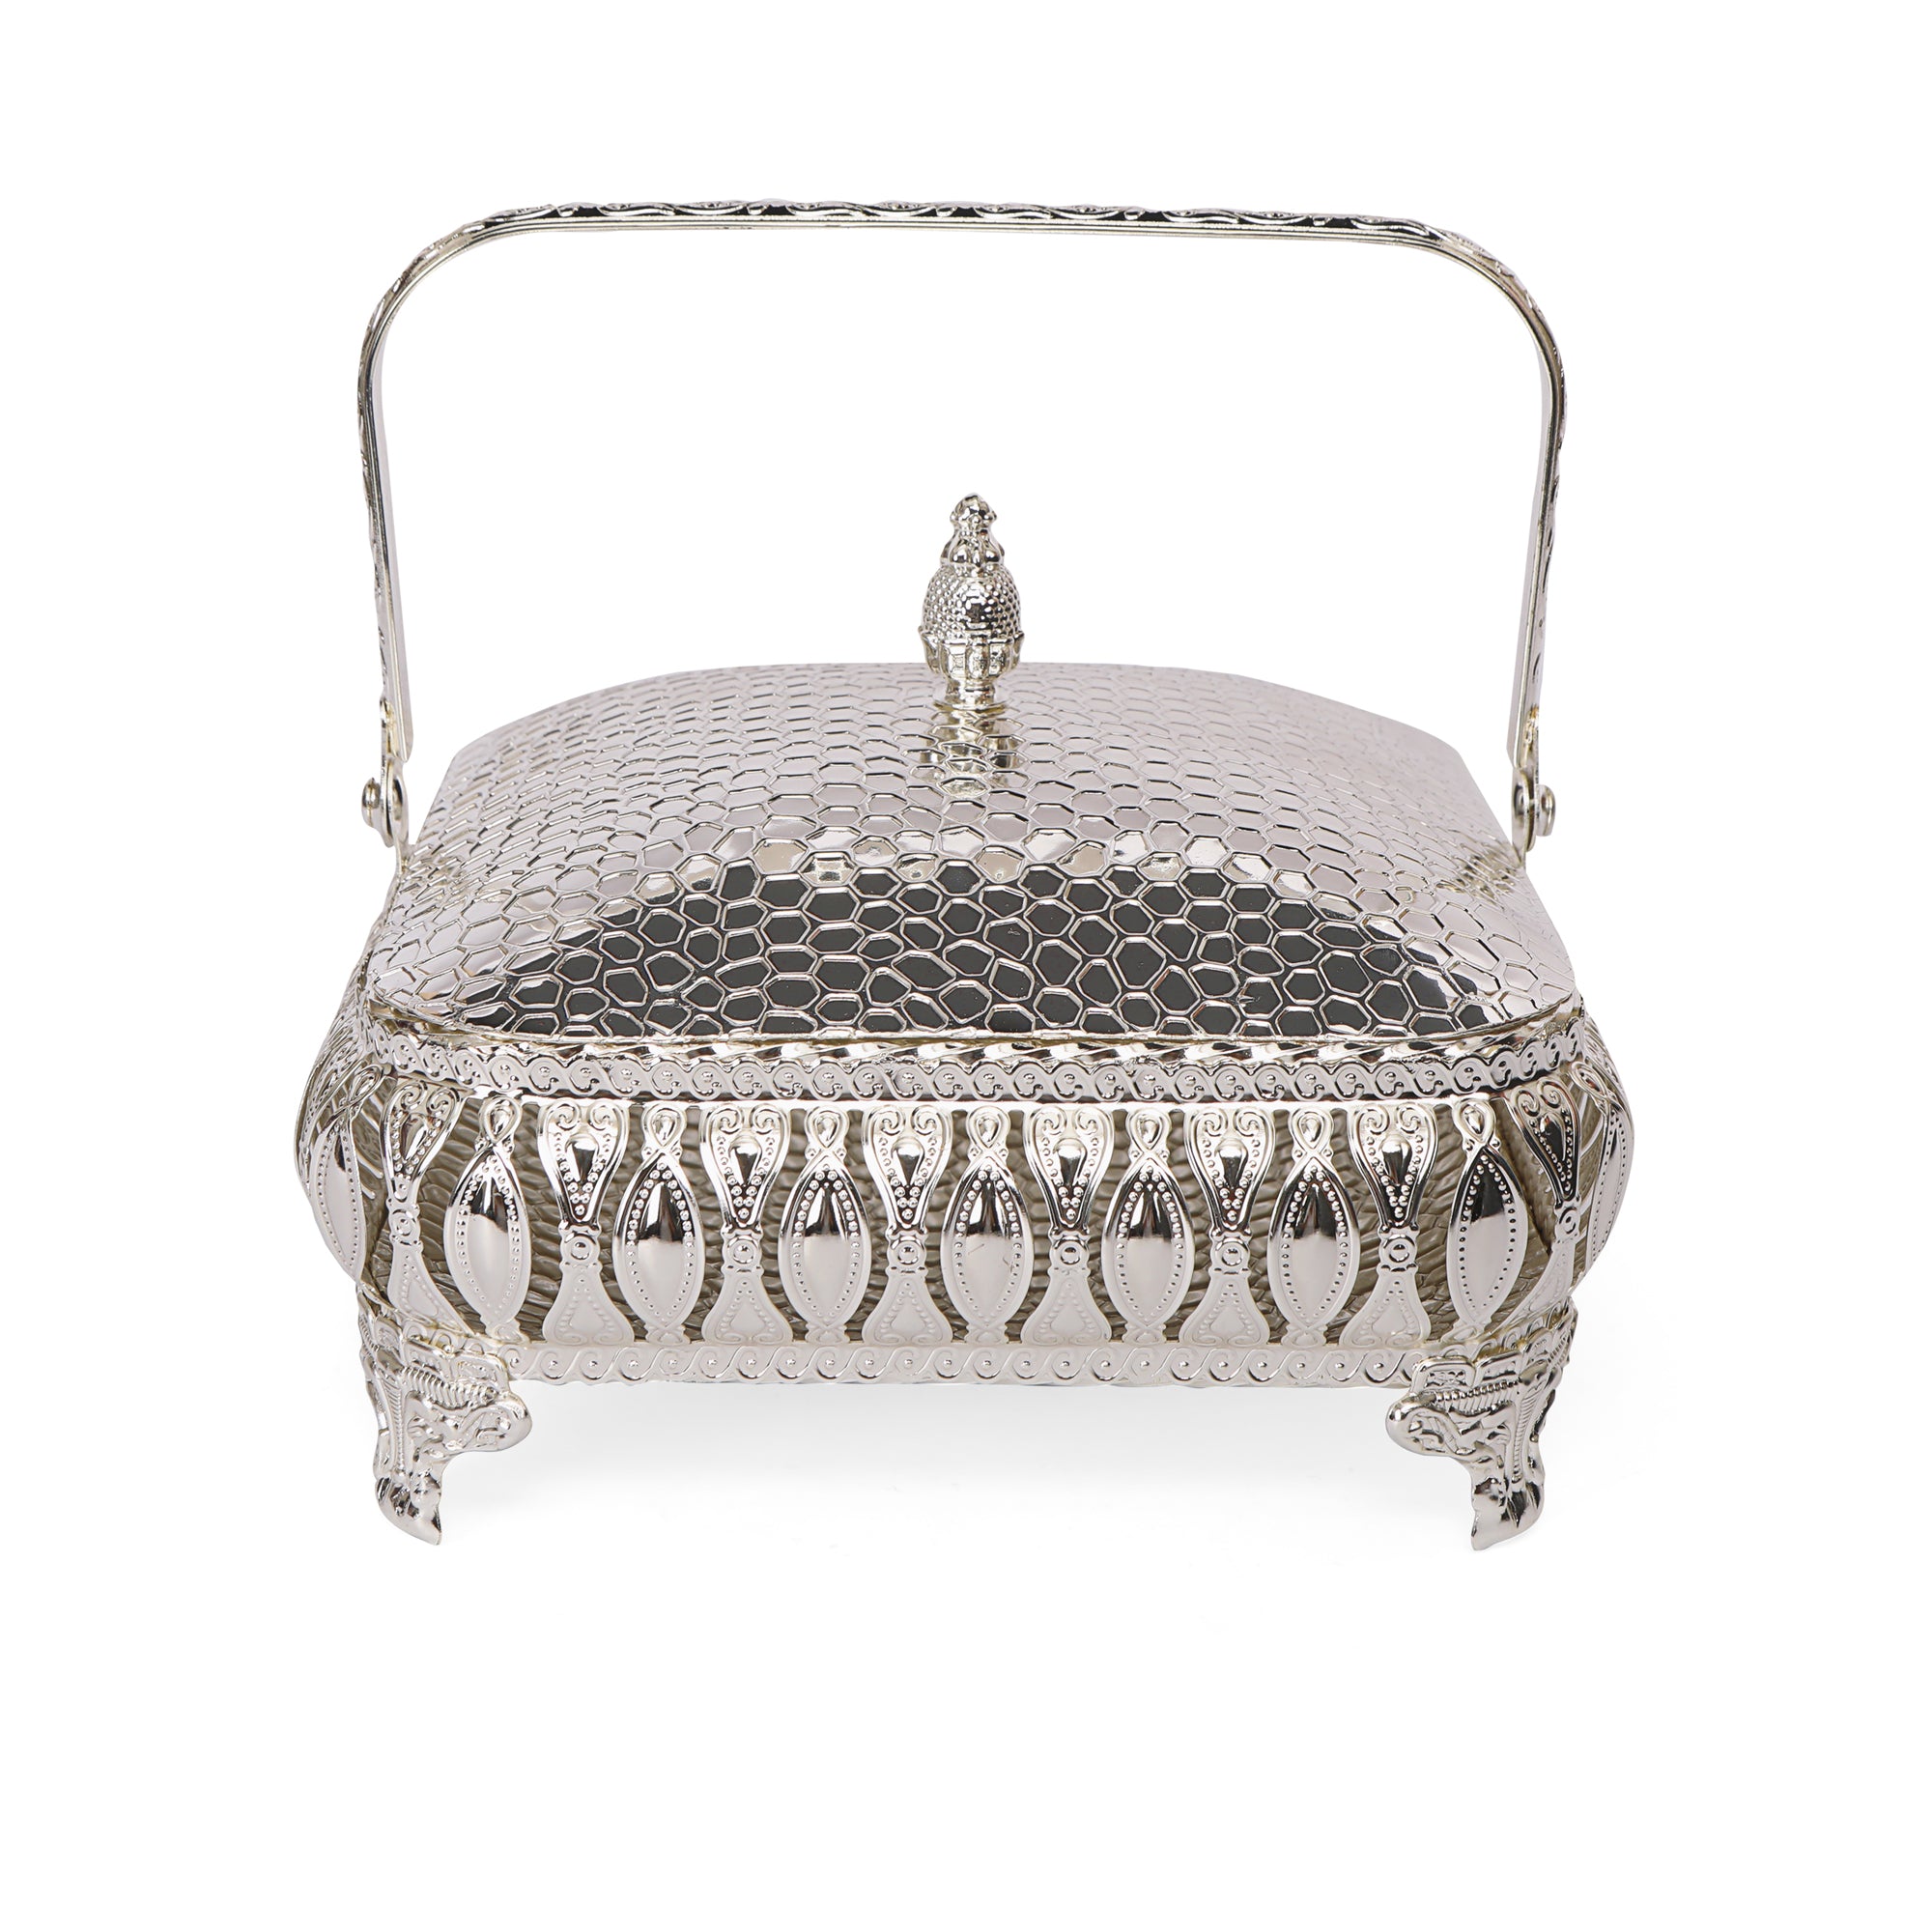 Square Basket - White Metal 4: The Home Co.